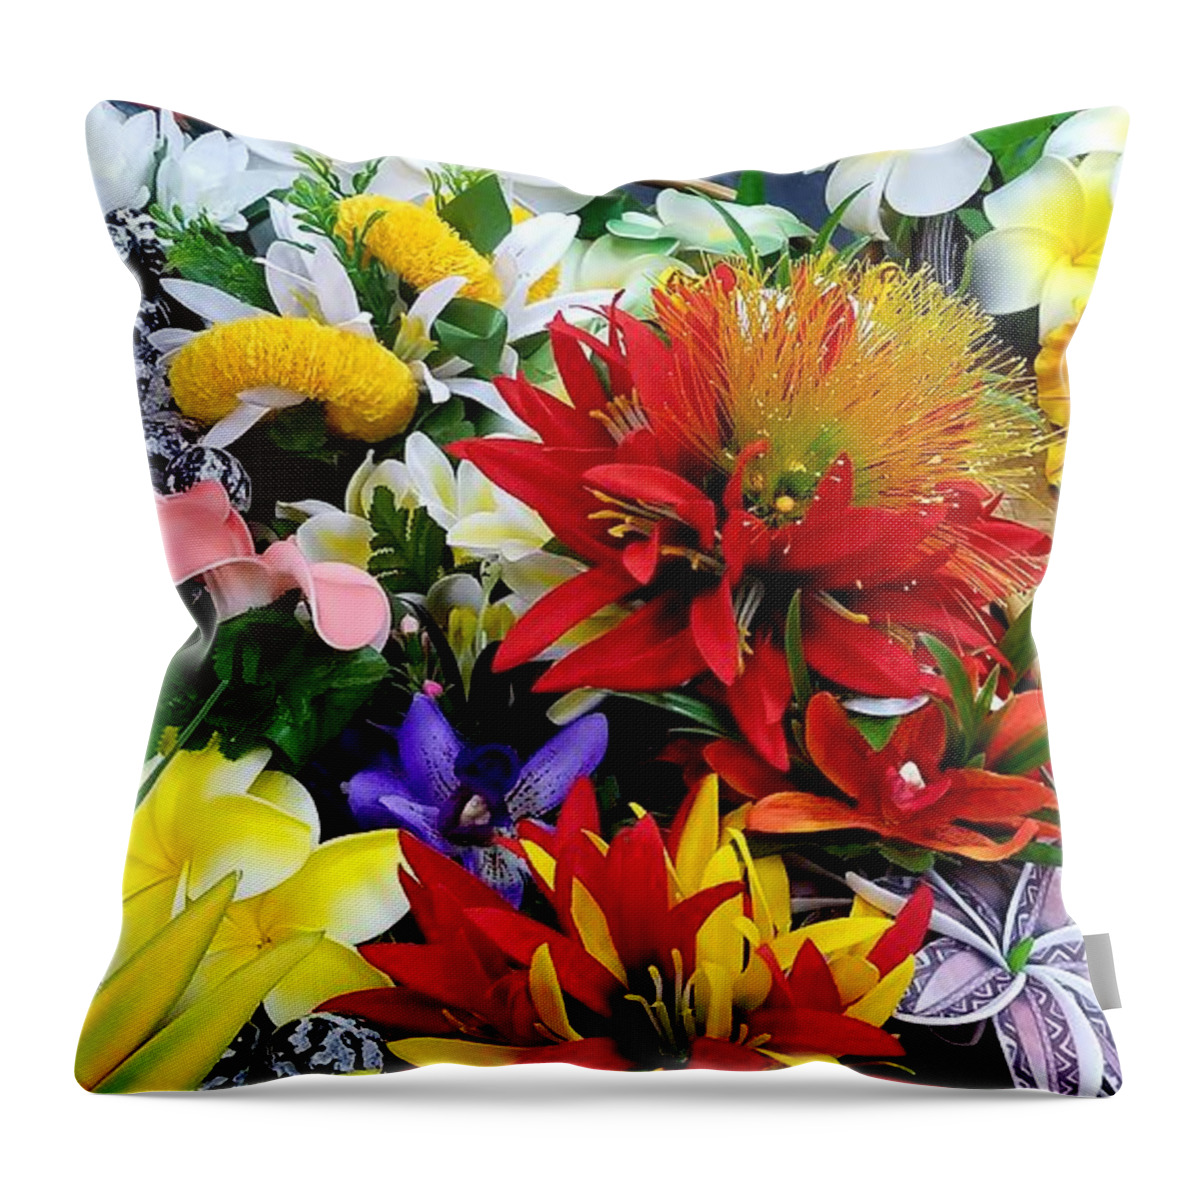 Flowers Throw Pillow featuring the photograph Flowers by Phyllis Spoor